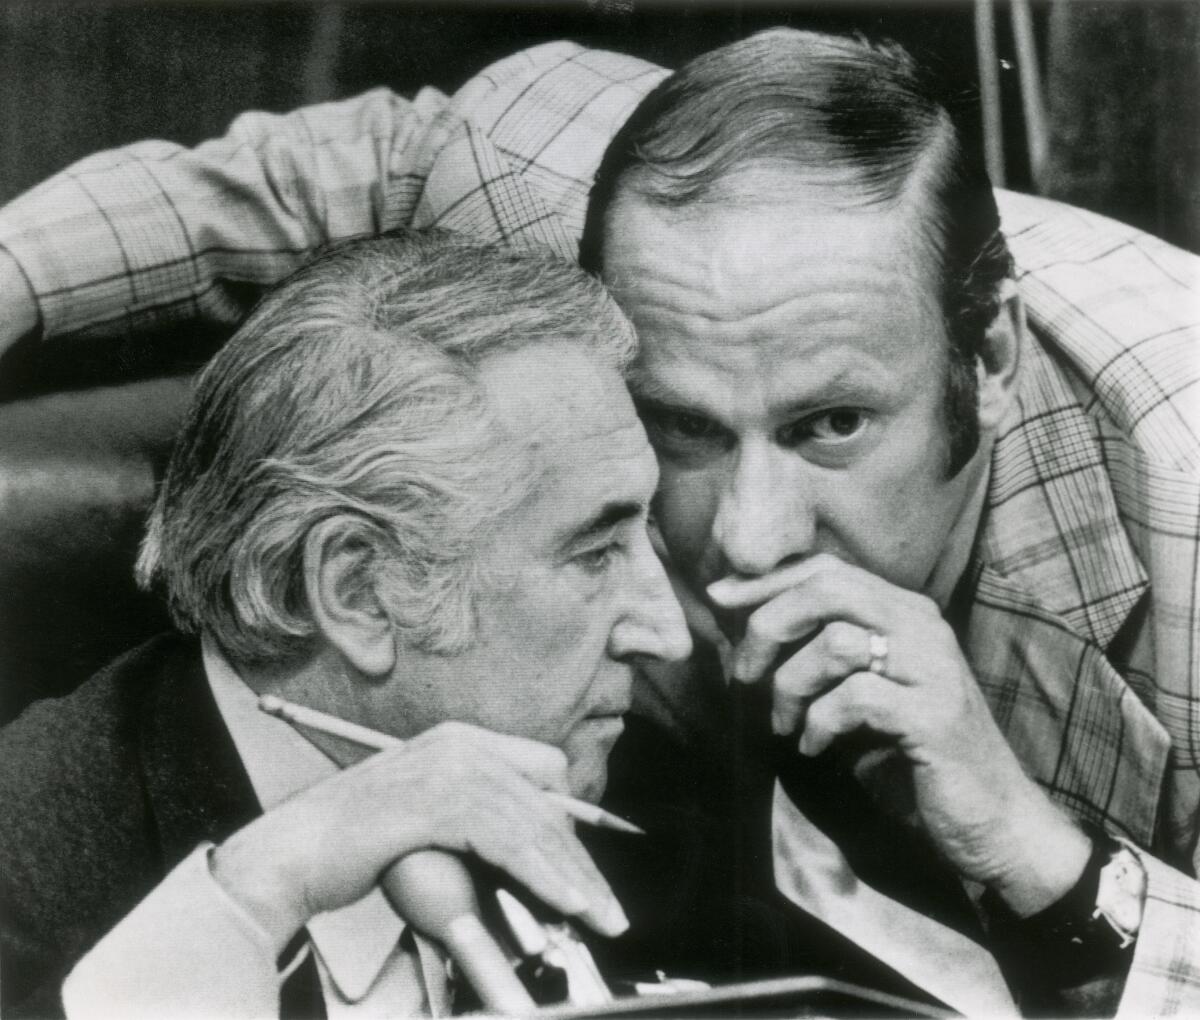 Rep. Thomas Railsback (R-Ill.), right, confers with House Judiciary Committee Chairman Peter Rodino (D-N.J.) during the committee's debate on articles of impeachment against President Nixon in 1974.